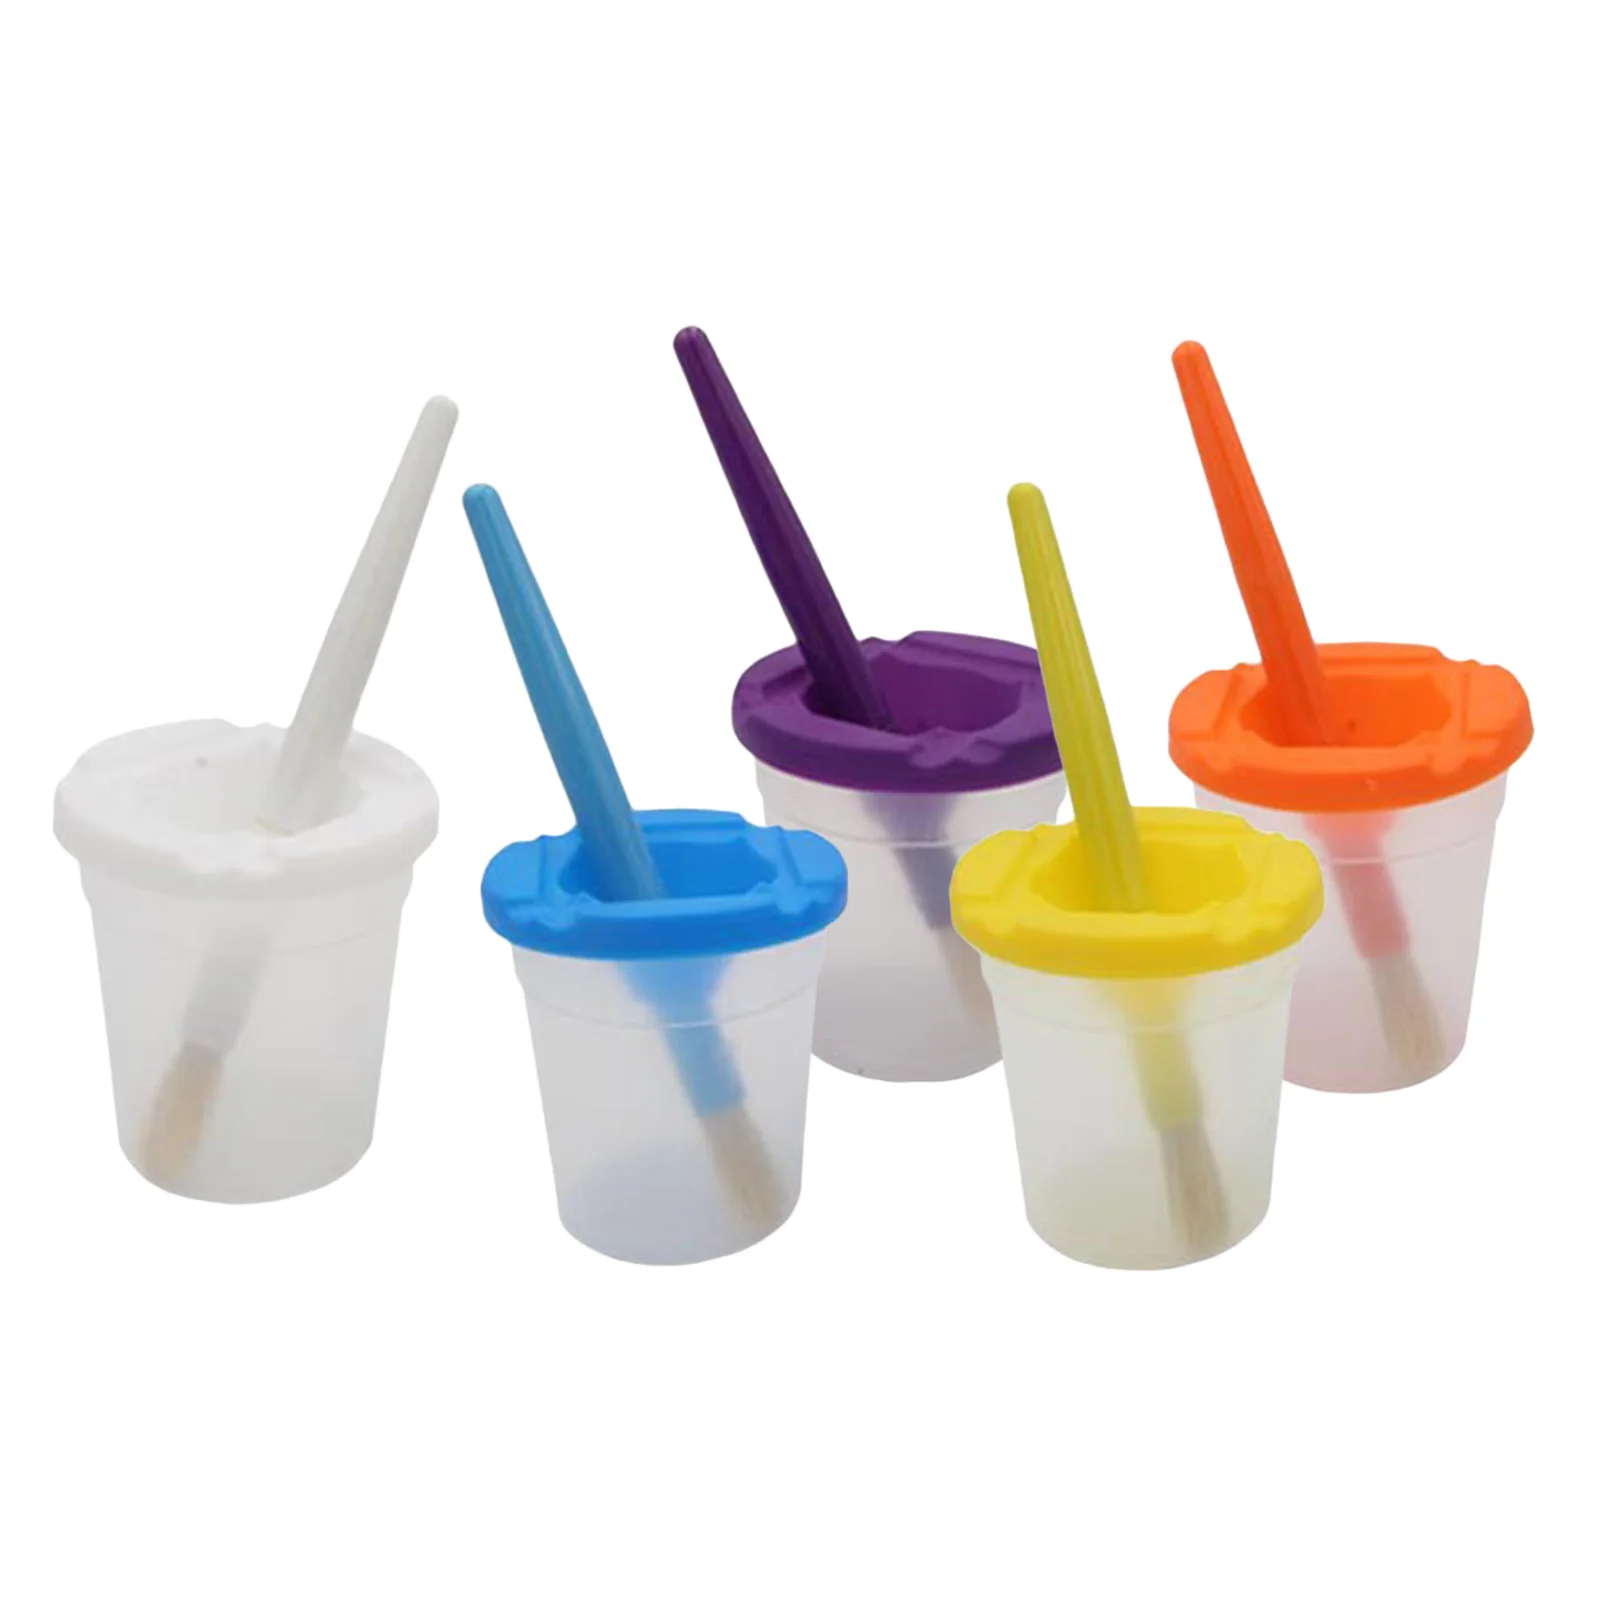 5pcs Spill Proof Paint Cups and 5pcs with Lids Round Paint Brushes for Kids Children`s Paintbrushes